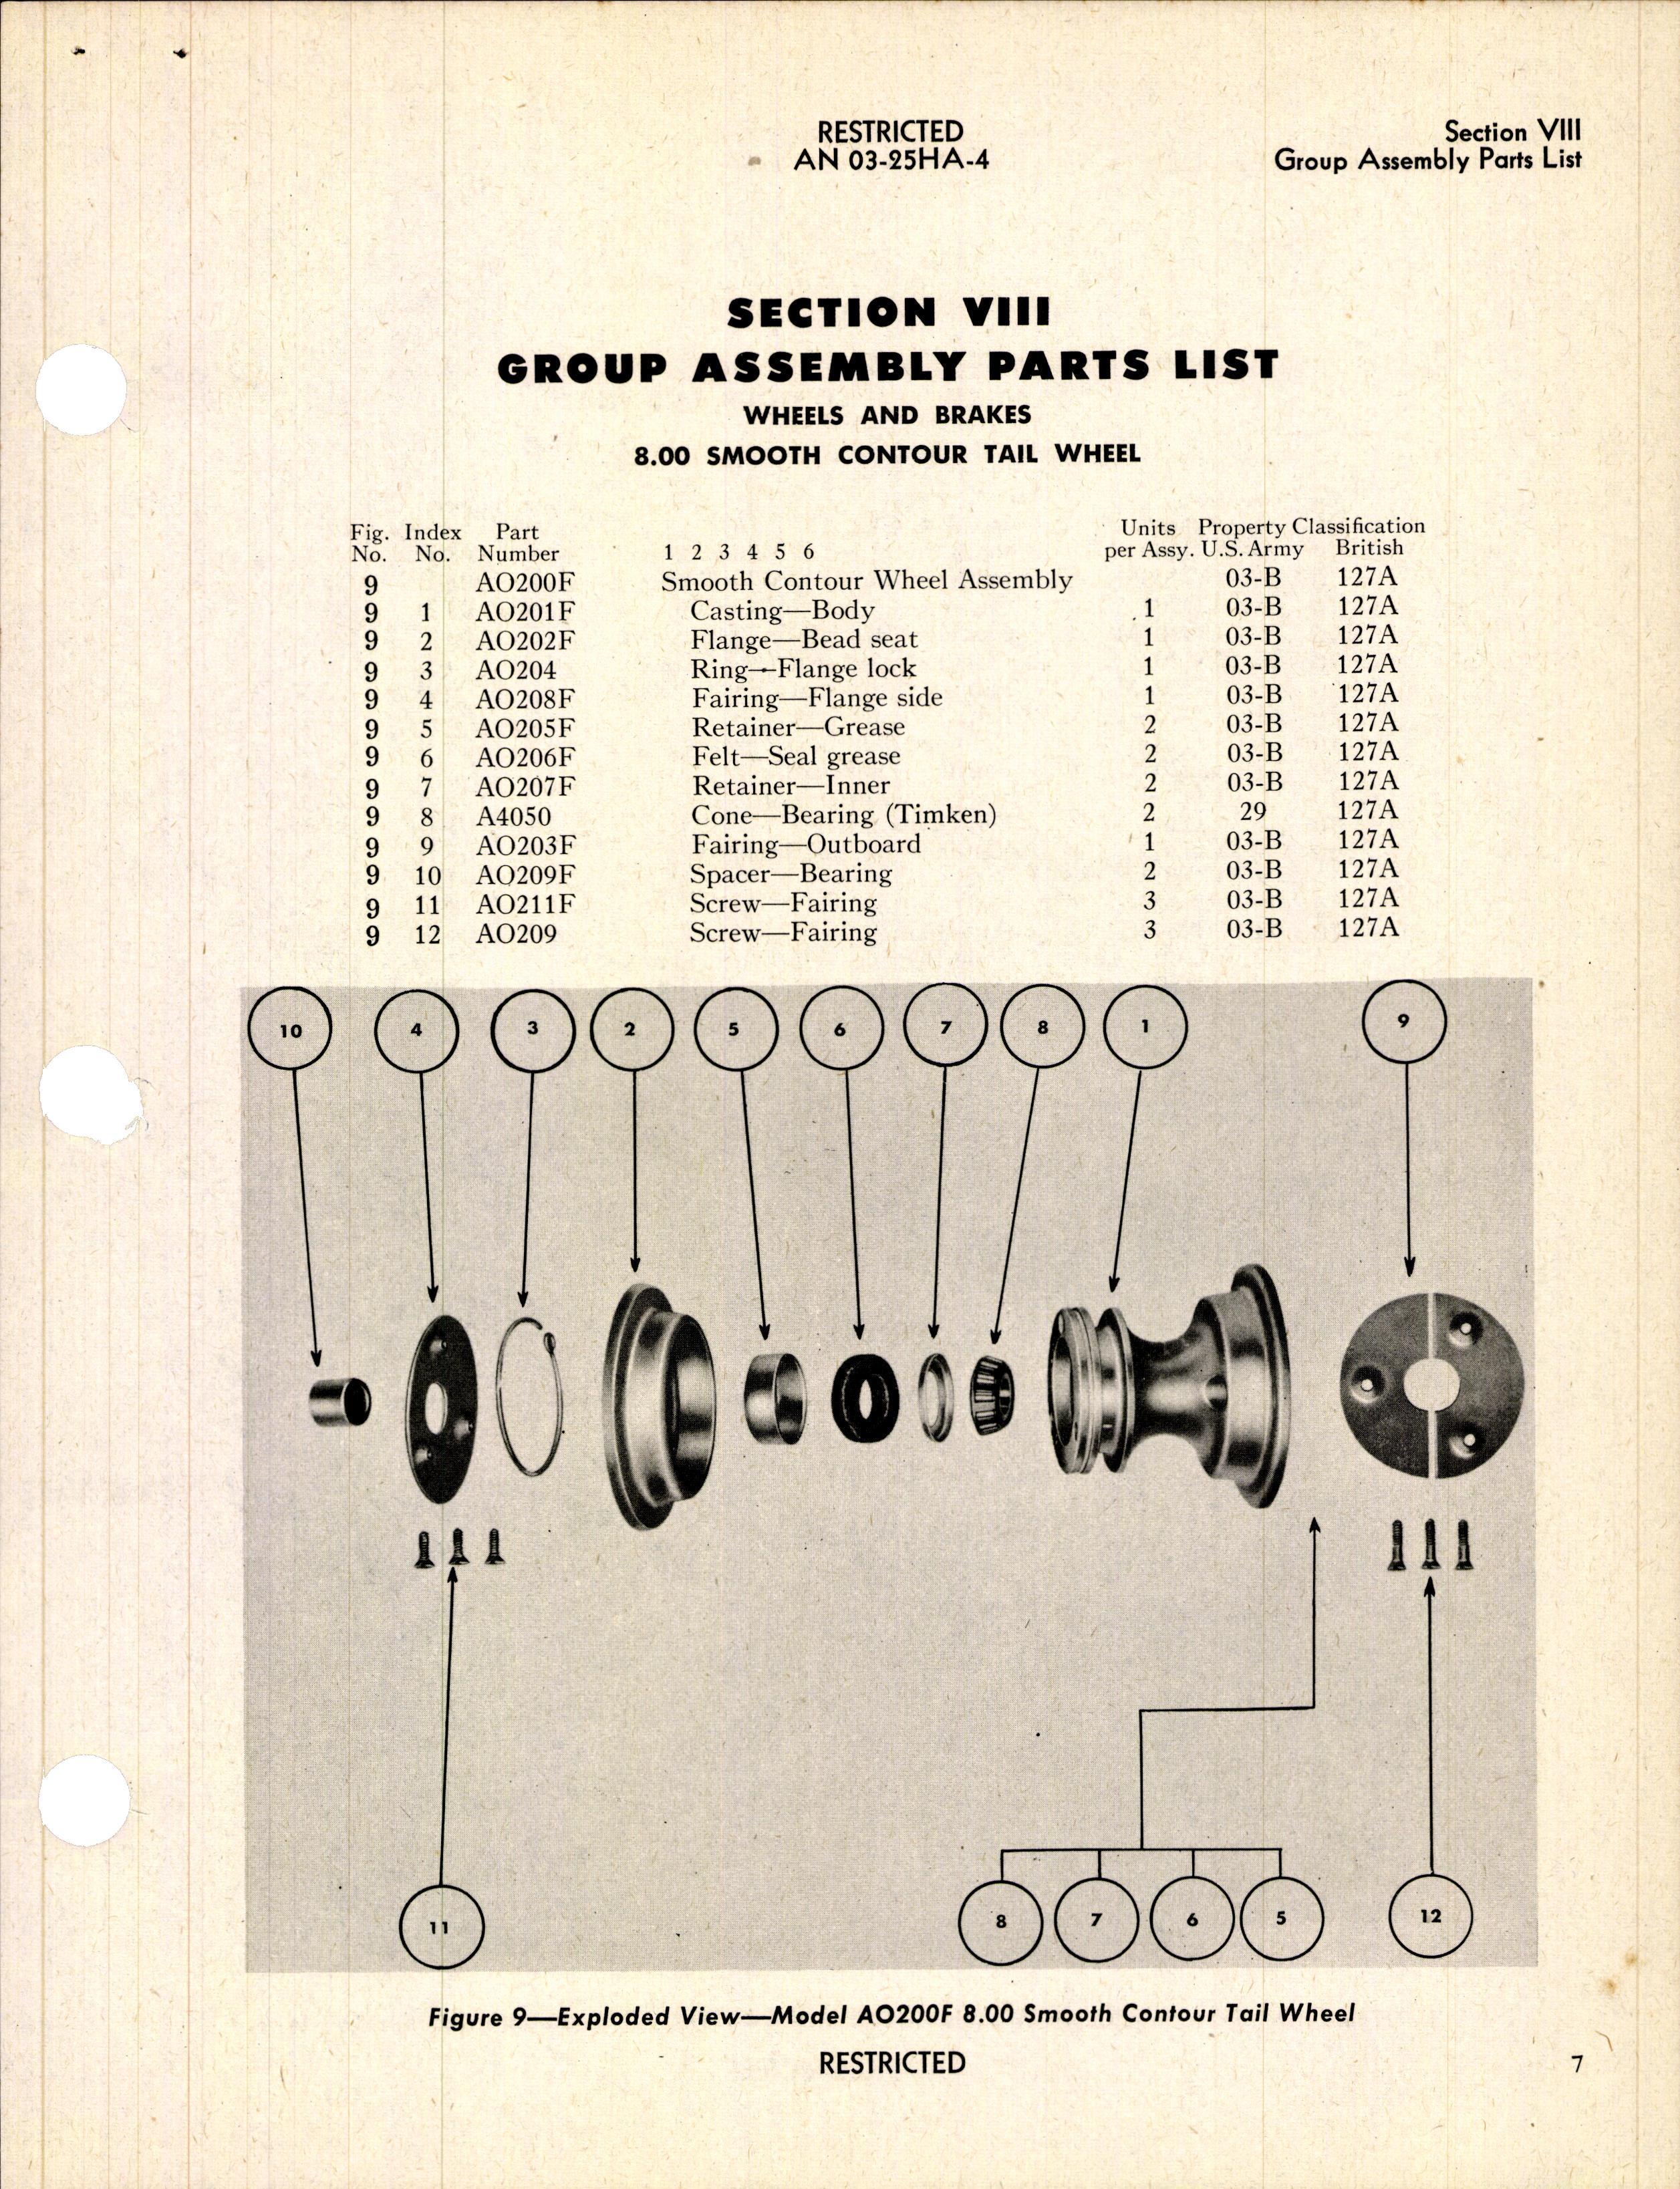 Sample page 17 from AirCorps Library document: Operation, Service and Overhaul Instructions with Parts Catalog for Tail Wheels